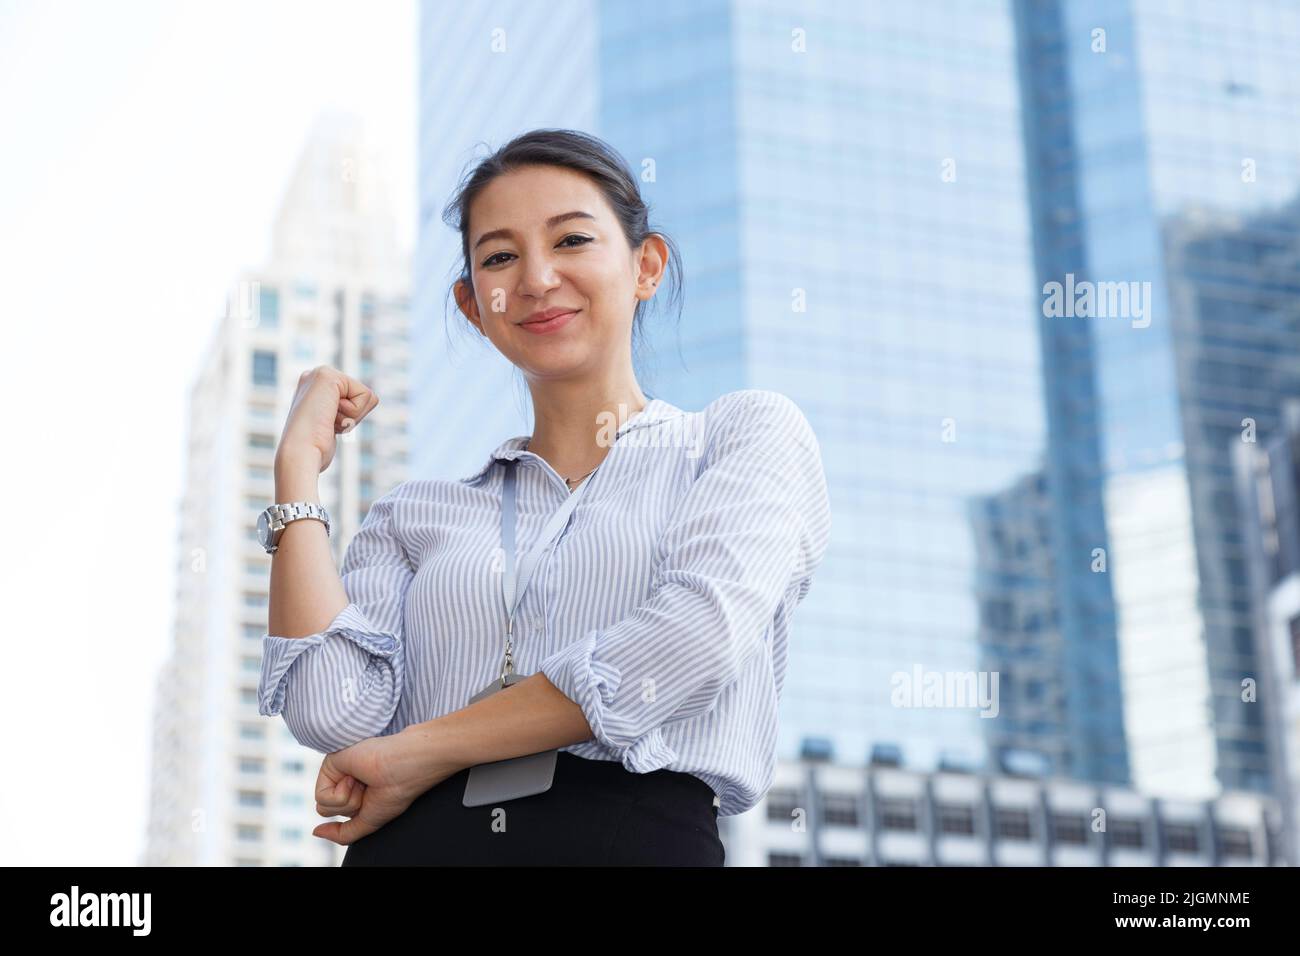 portrait of confident happy smiling young asian businesswoman standing outside the office in the city with building background and copy space. busines Stock Photo